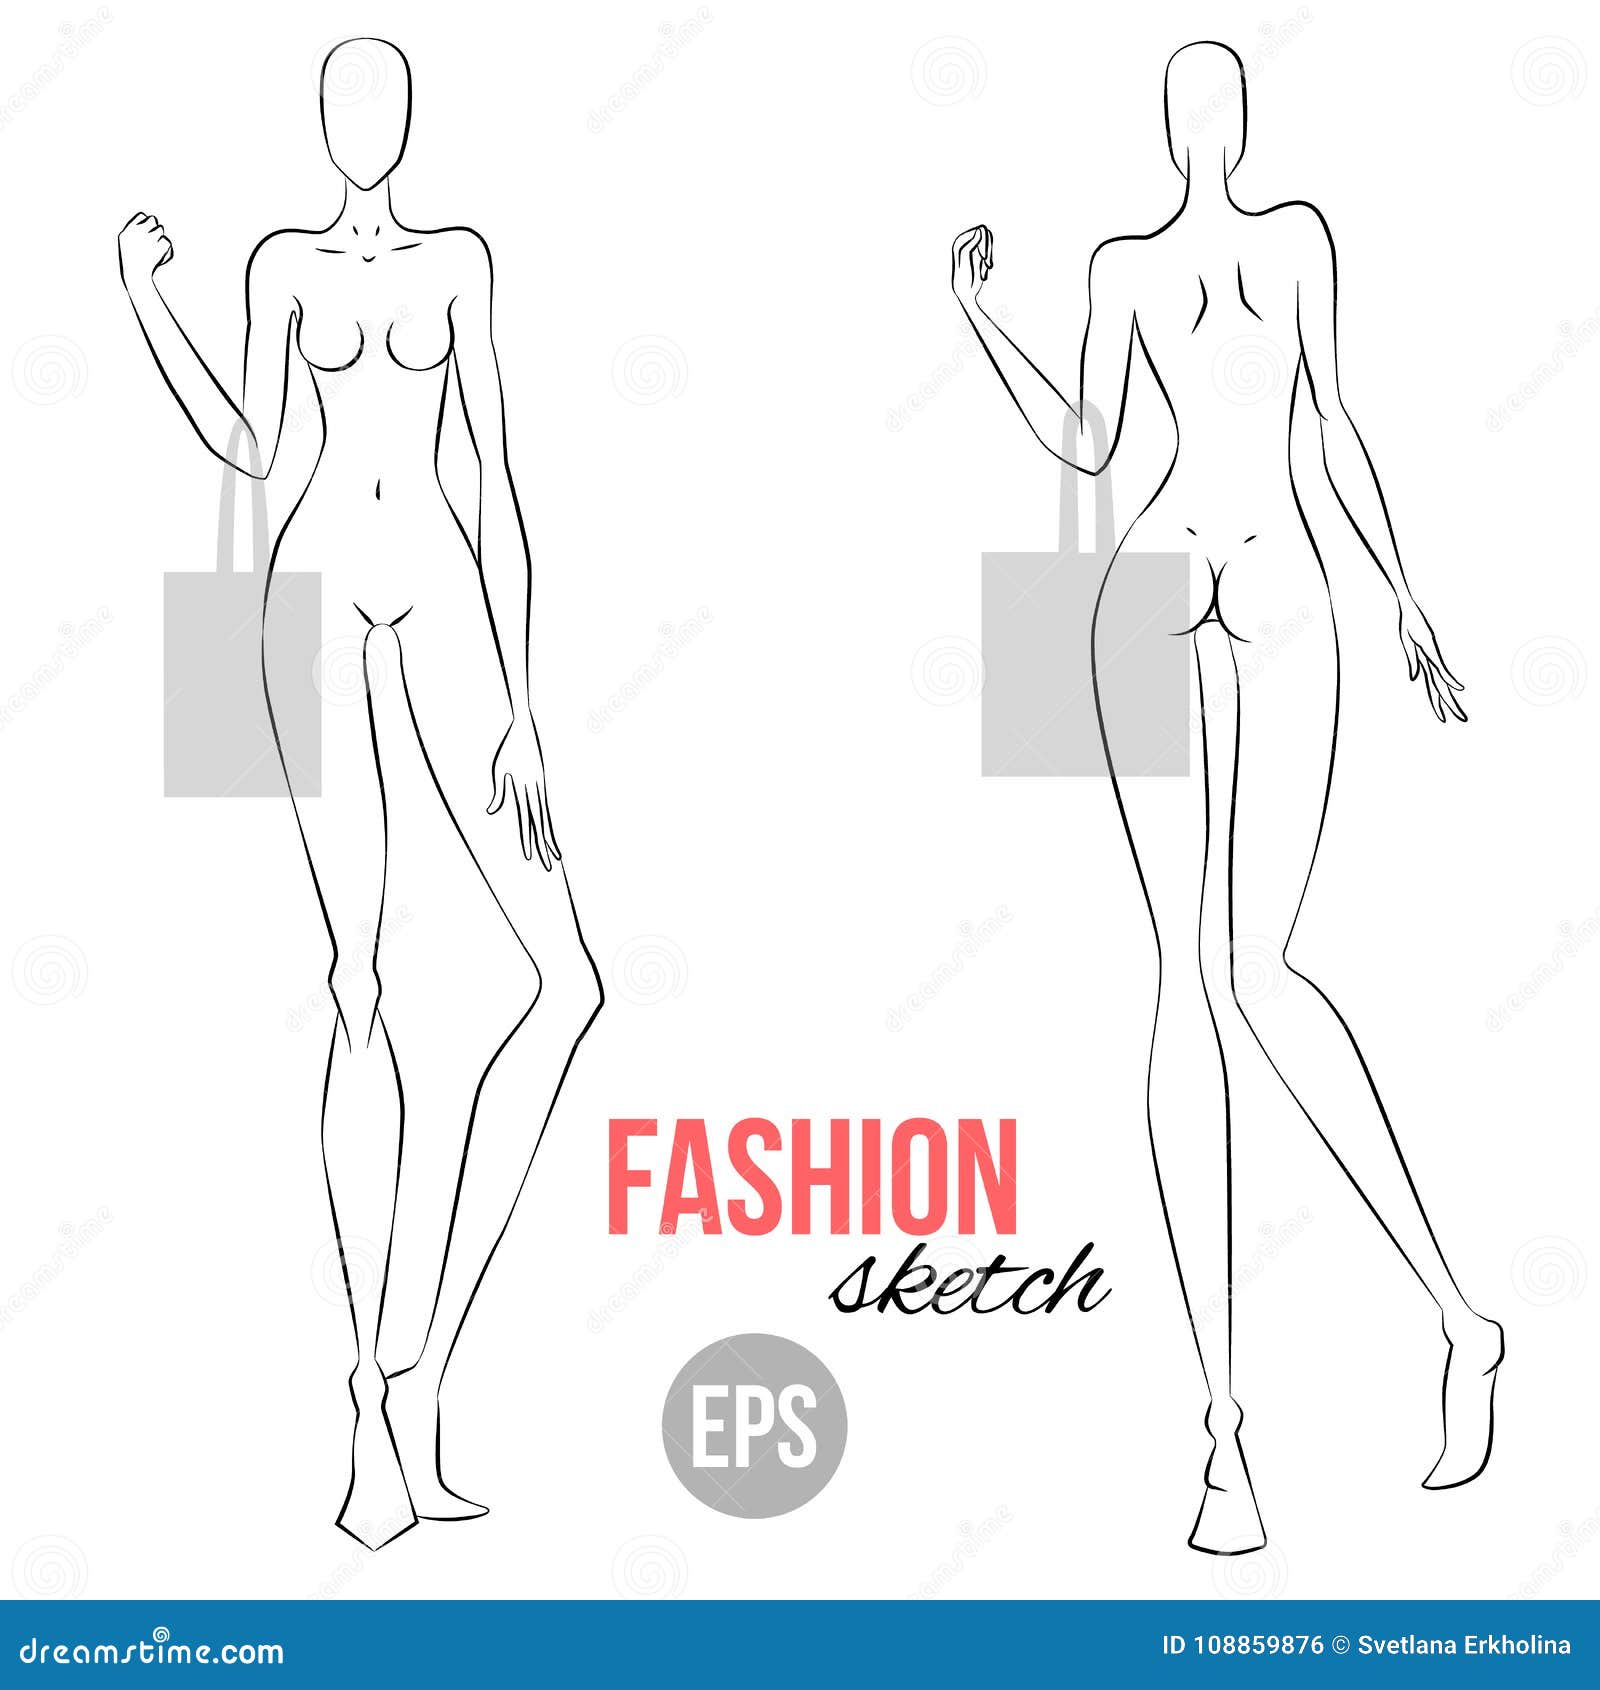 Blank t shirt outline sketch apparel tshirt cad design isolated  technical fashion illustration mockup template front and back vector   Download on Freepik